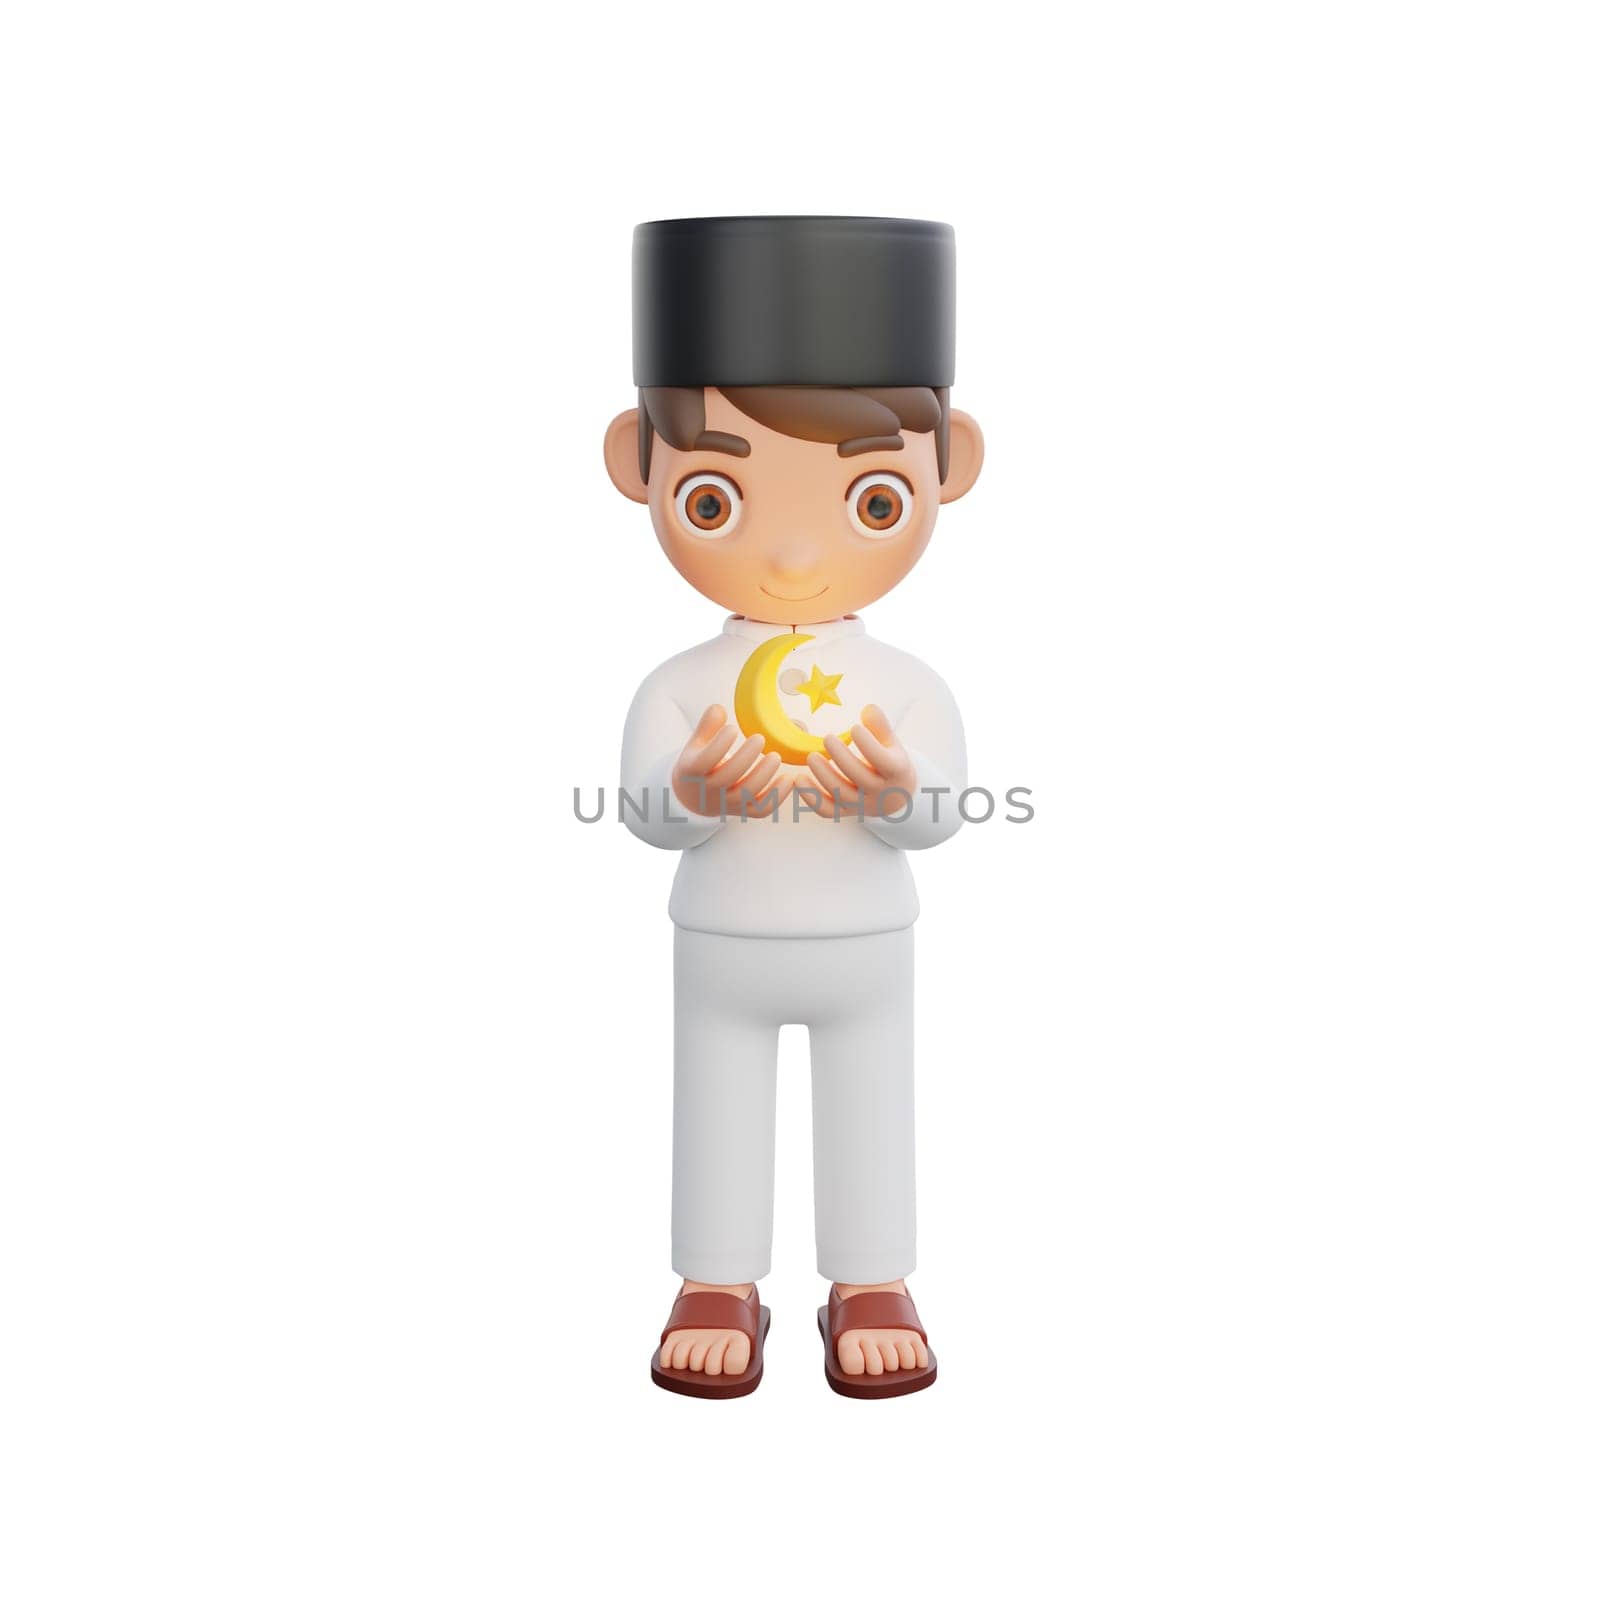 3D Illustration of Muslim character joyful holding a glowing crescent moon and star, perfect for Ramadan kareem themed projects